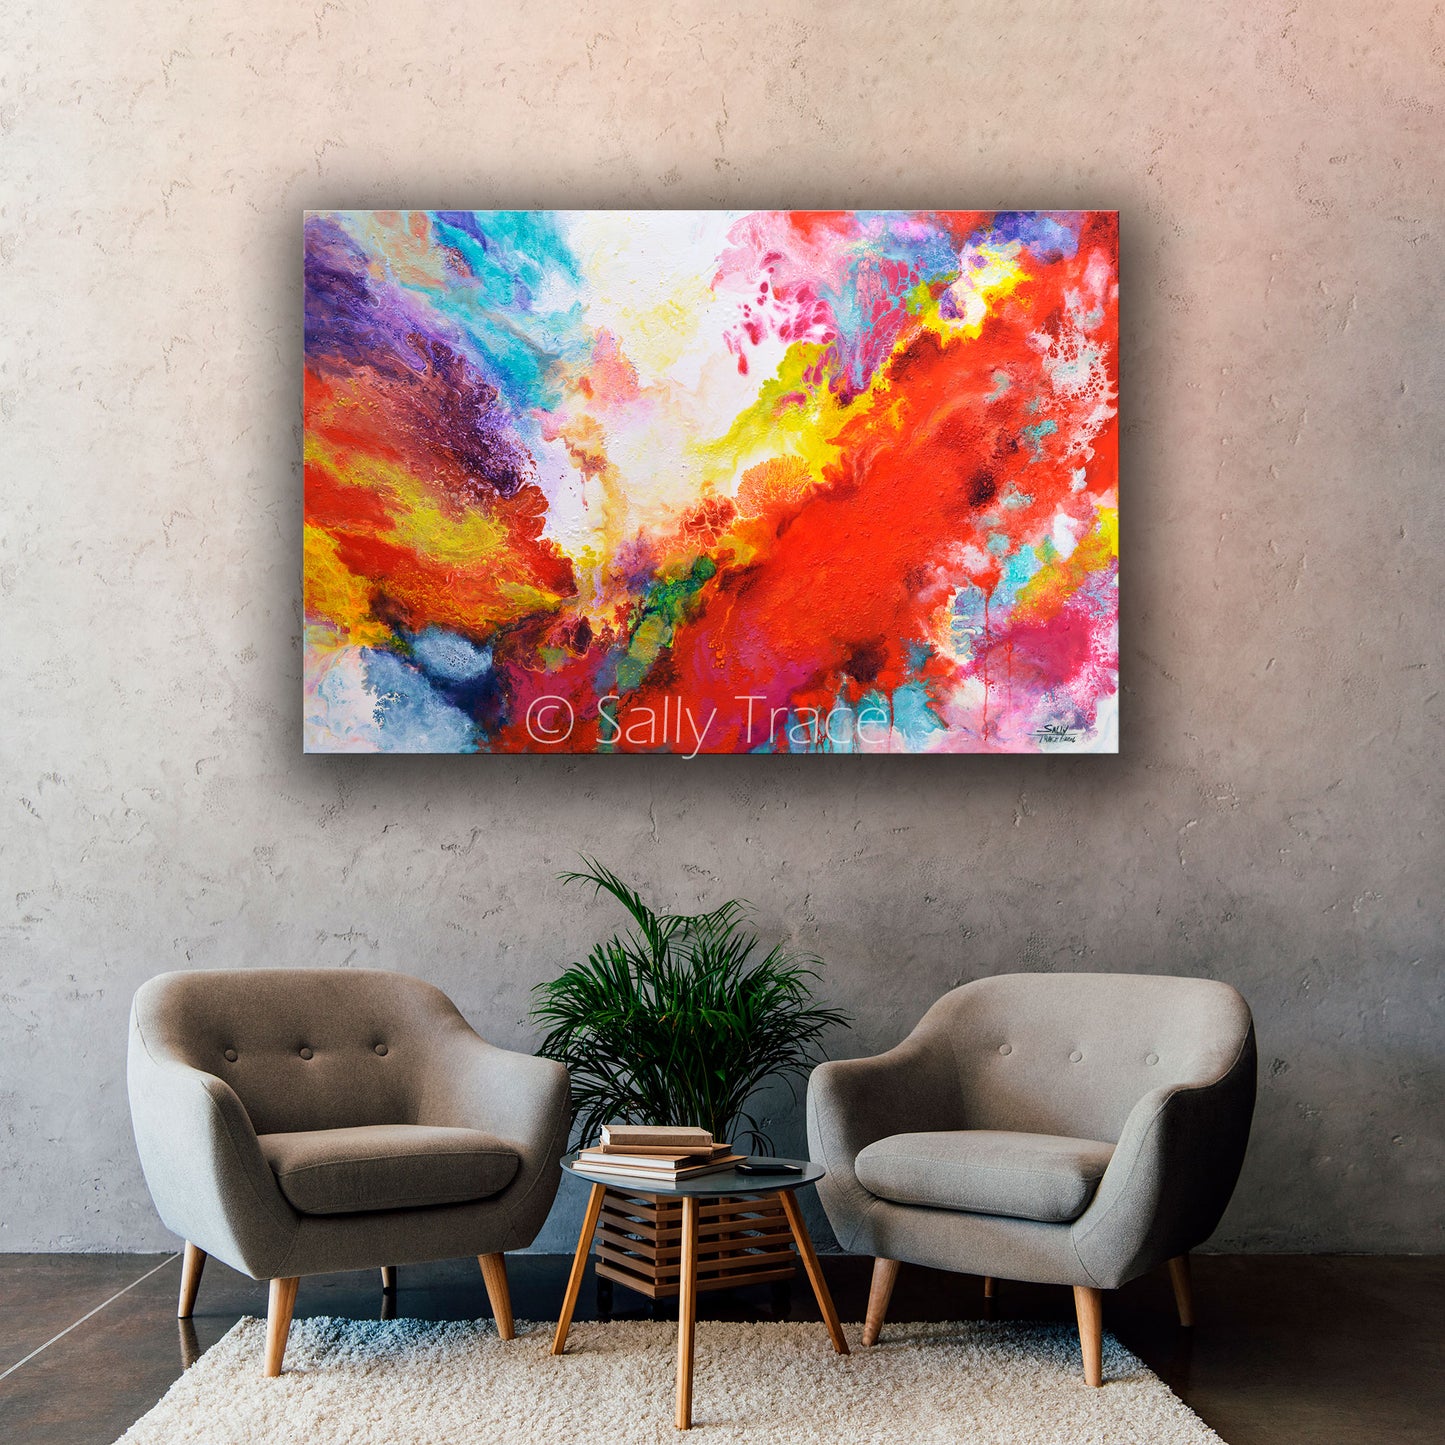 Modern and dynamic fluid art giclee prints on canvas made from my fluid art pour painting "Tenacity" by Sally Trace